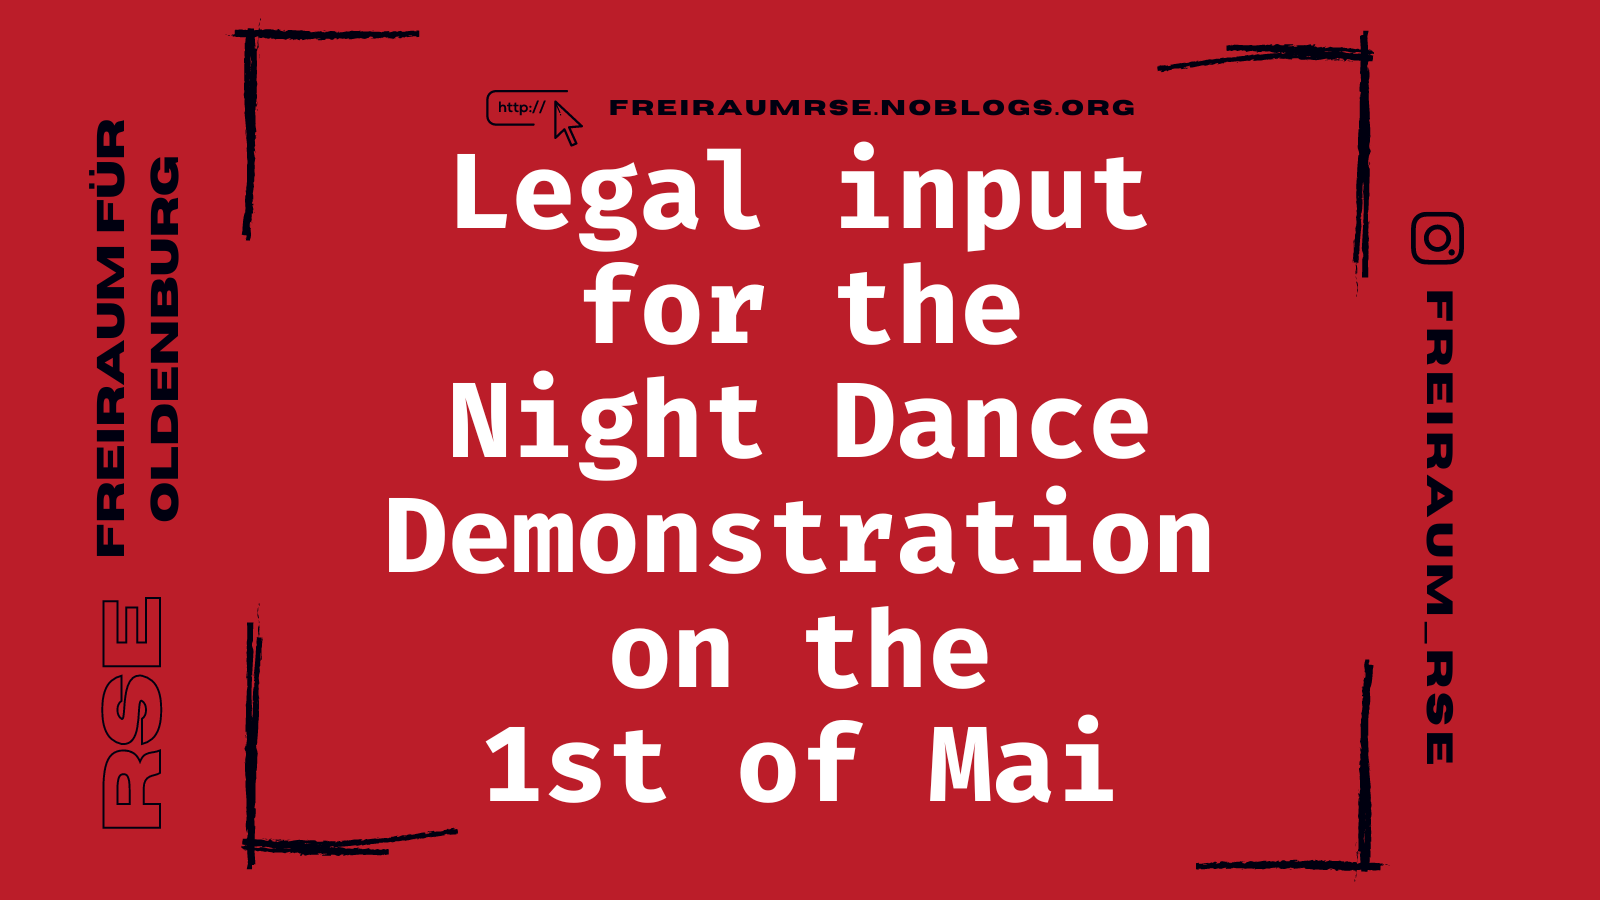 Legal input for the Night Dance Demonstration on the 1st of Mai